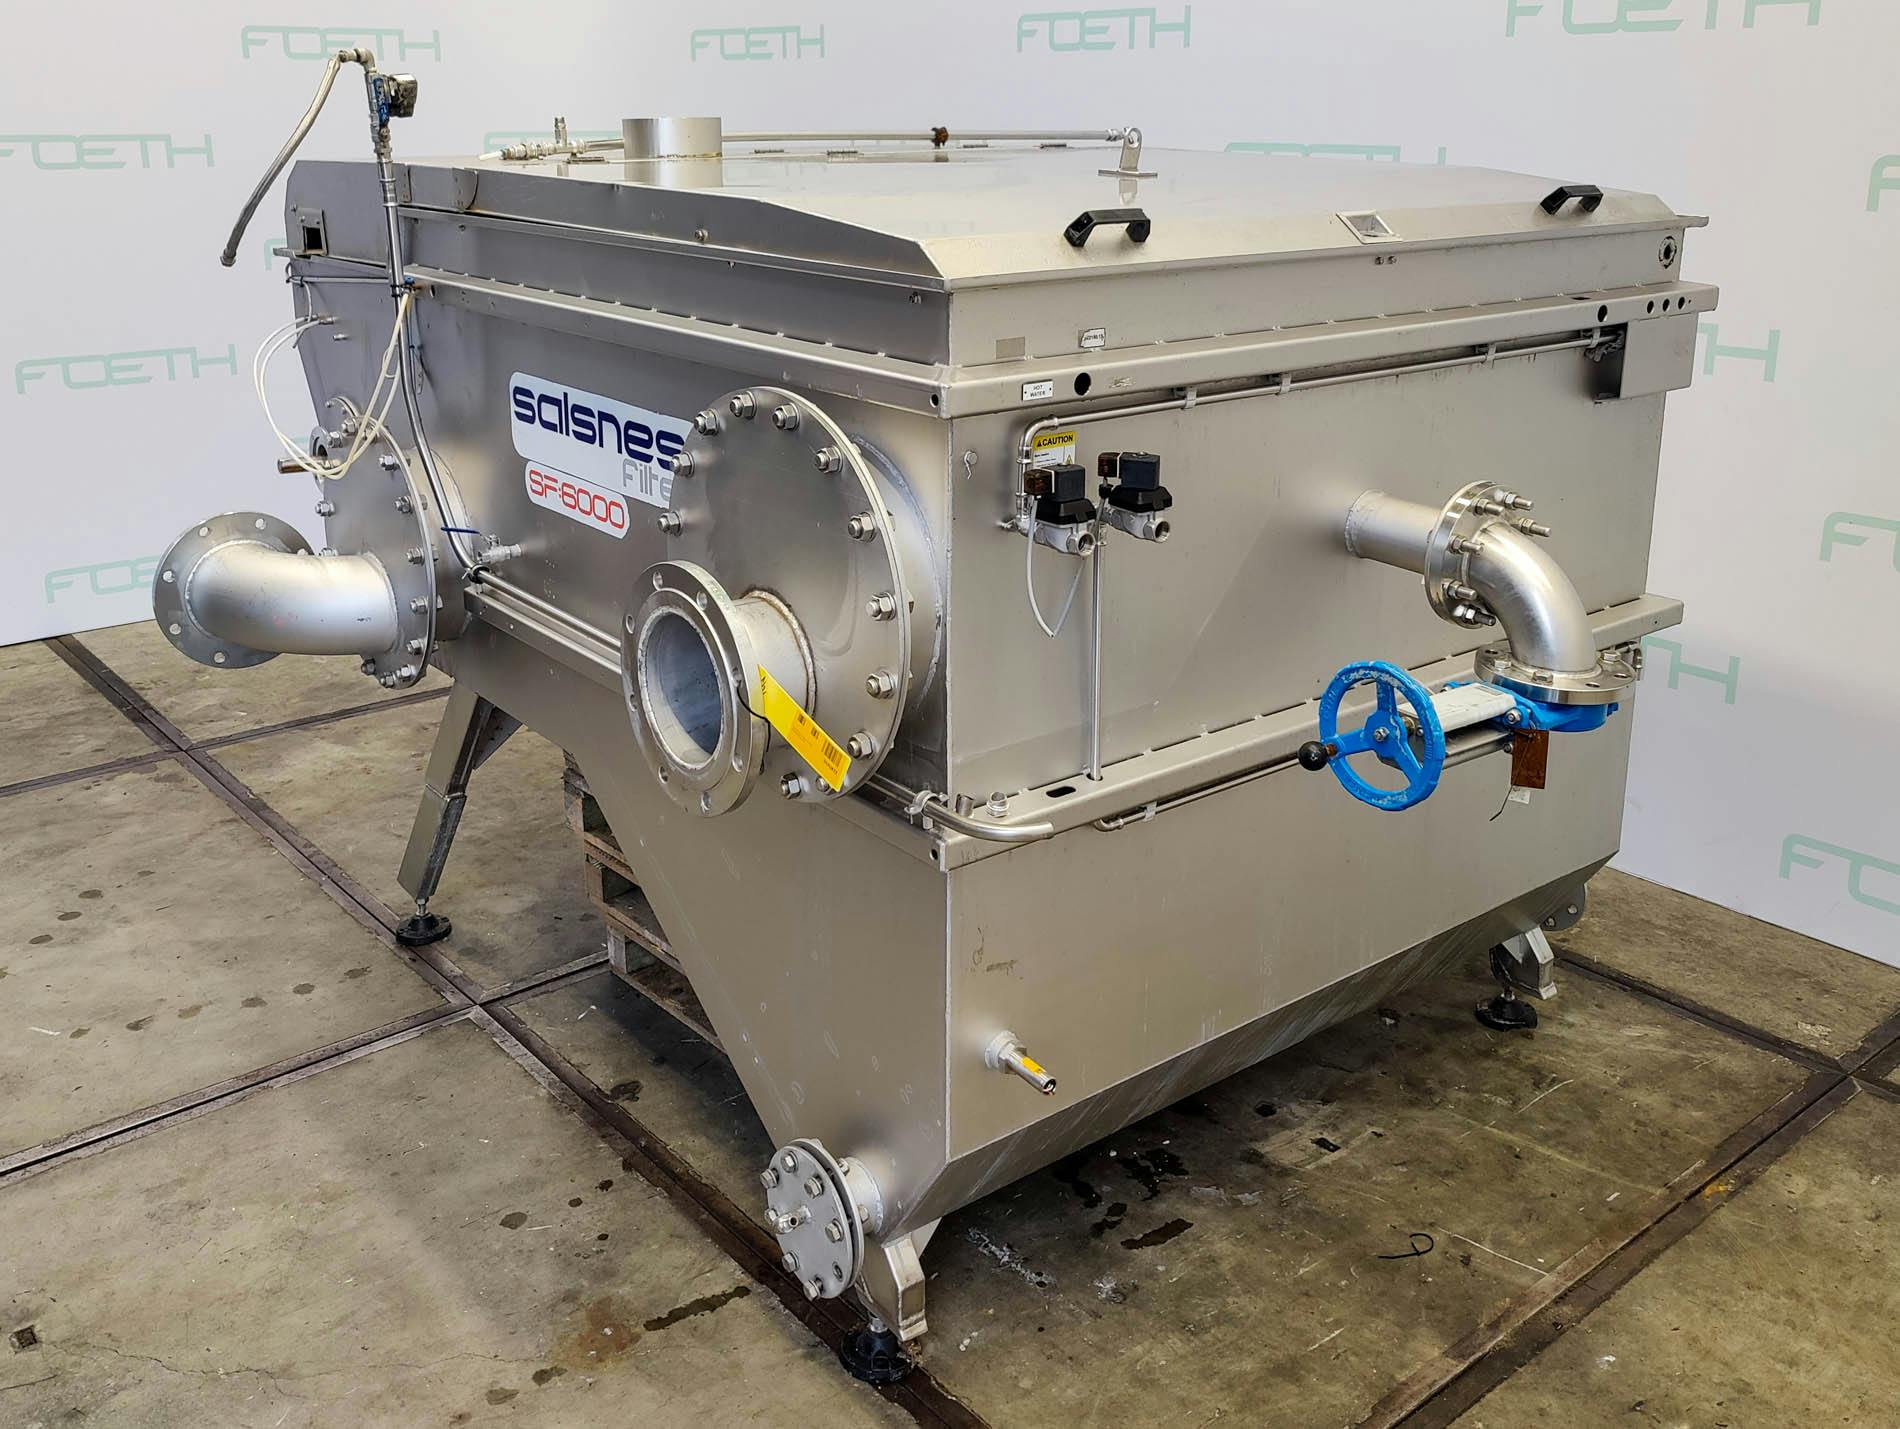 Salsnes 6000 "Solids Separation with Integrated Sludge Thickening and Dewatering" - Filtr - image 4